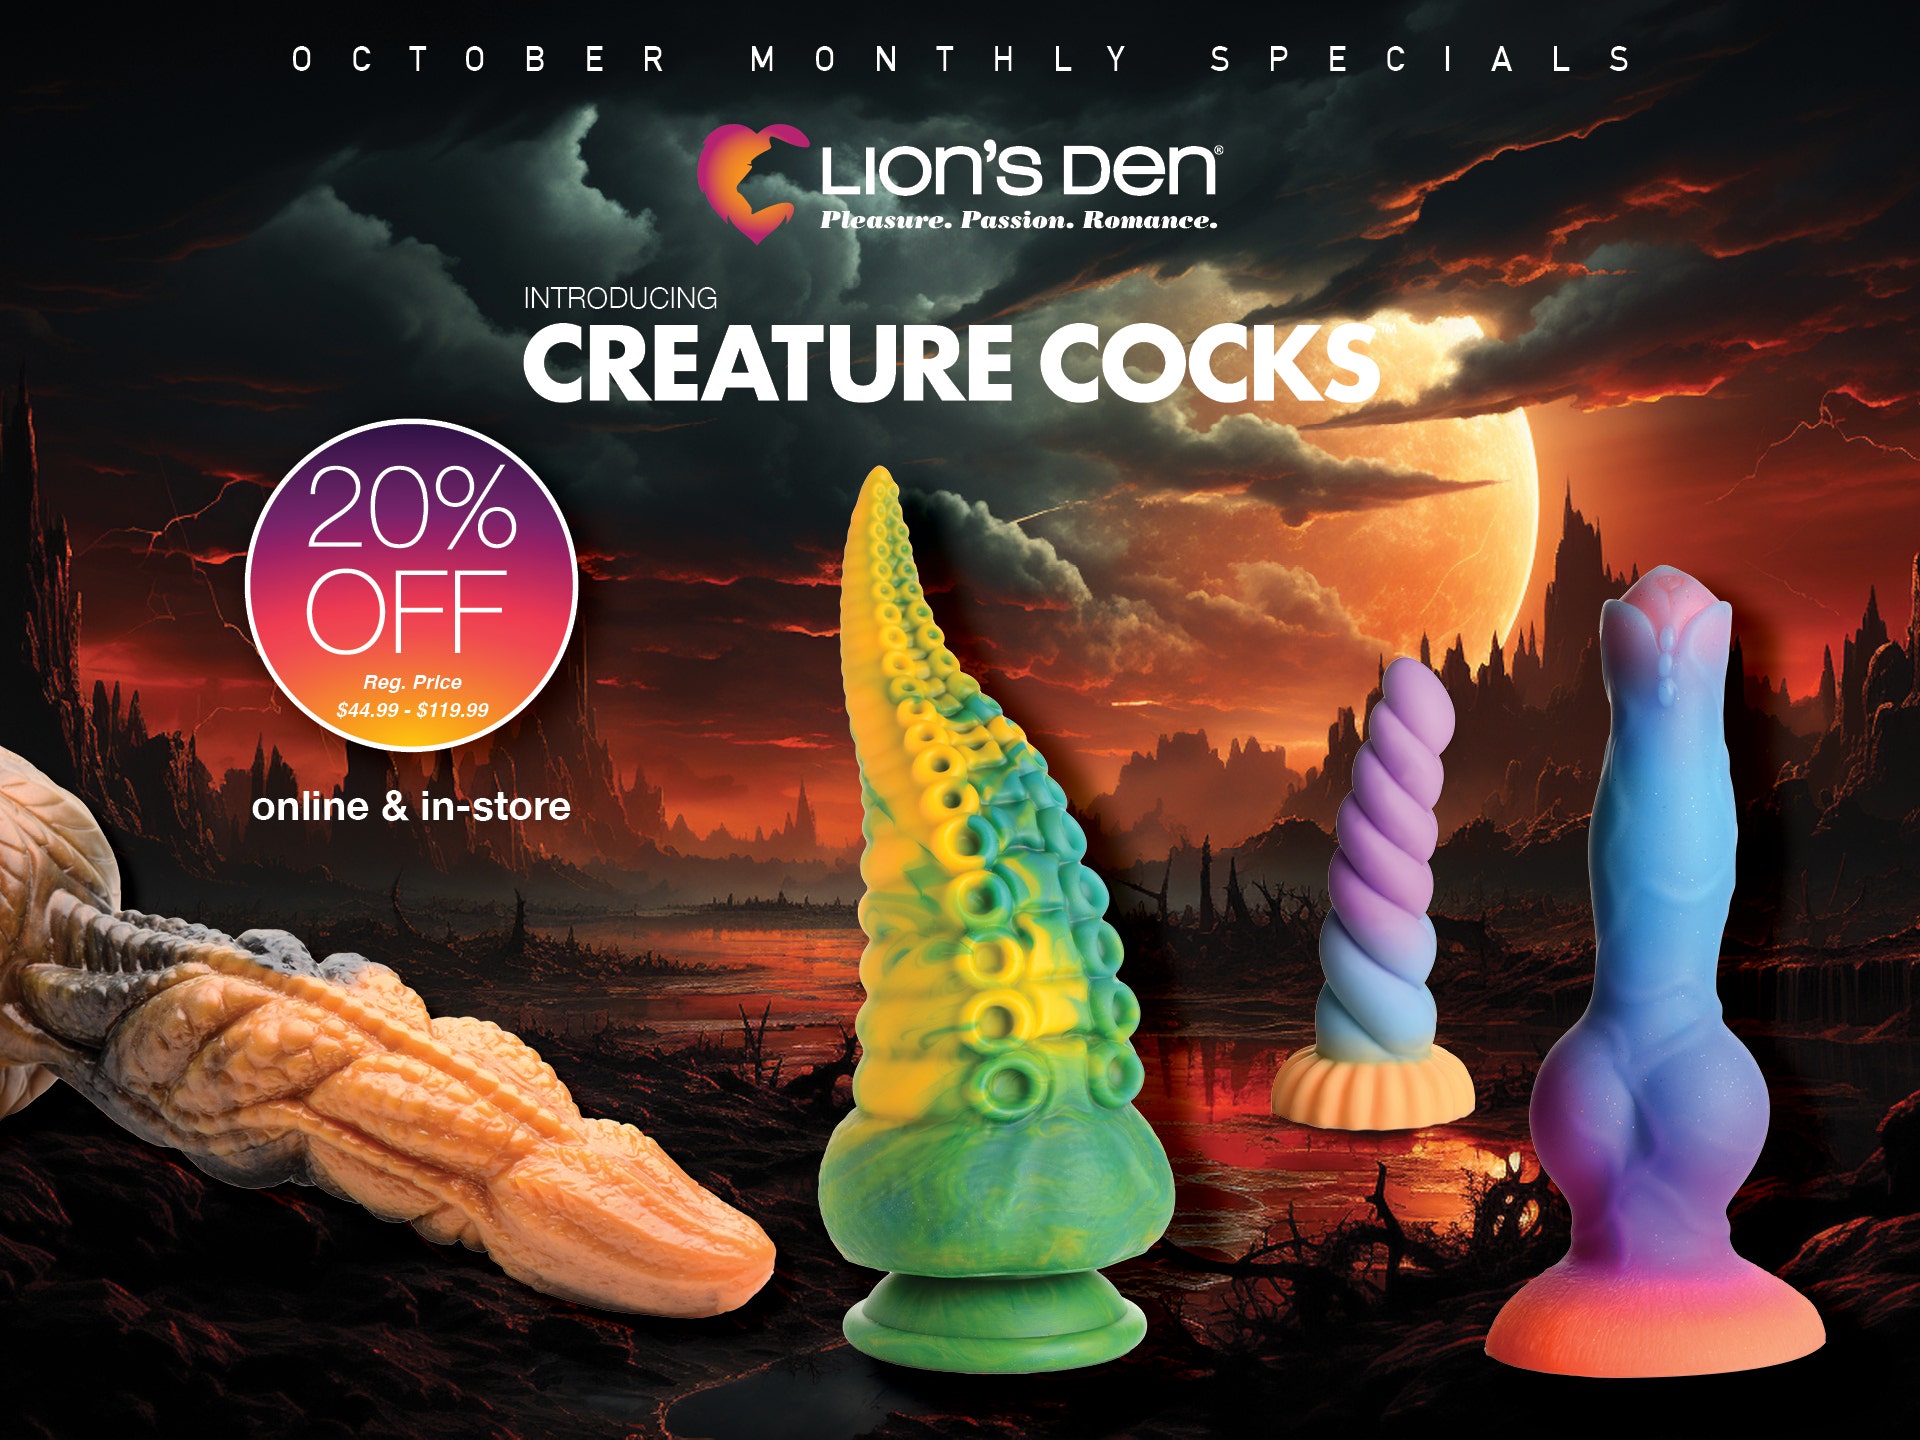 It's Kinktober! Live the fantasy and take 50% OFF All Creature Cocks by XR Brands